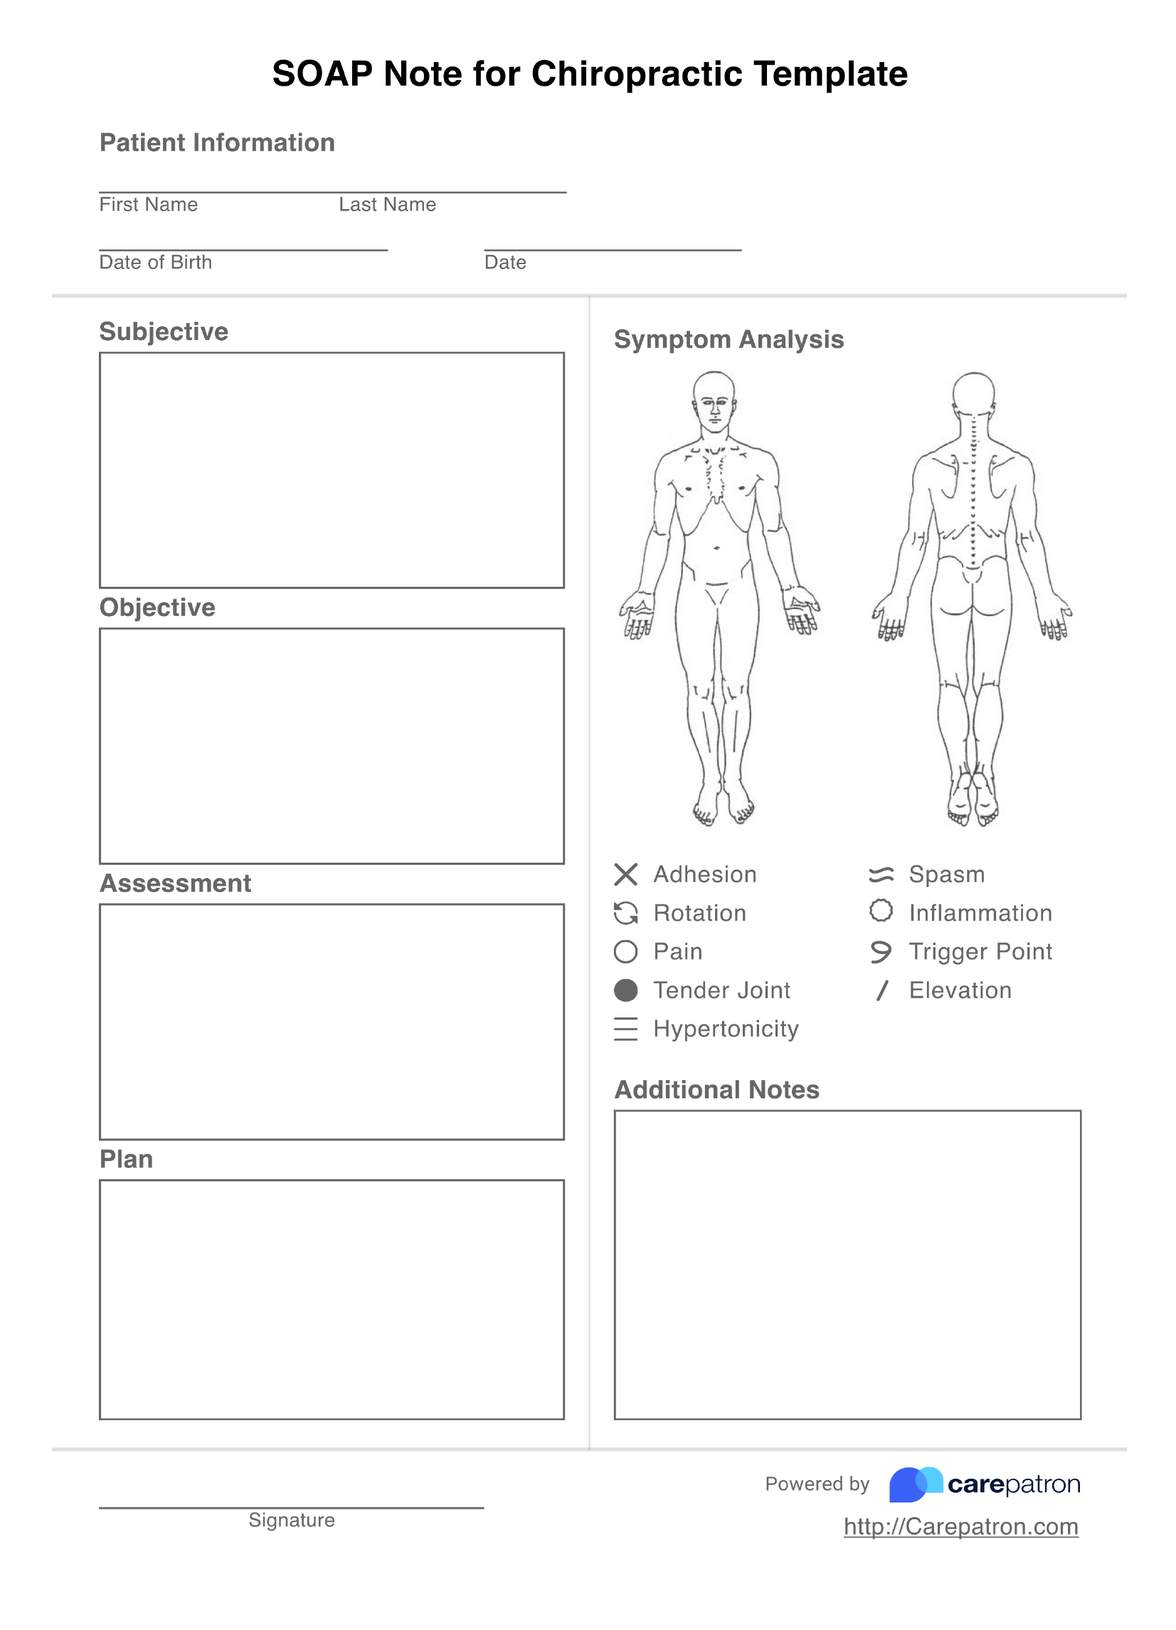 SOAP Notes for Chiropractic Template PDF Example